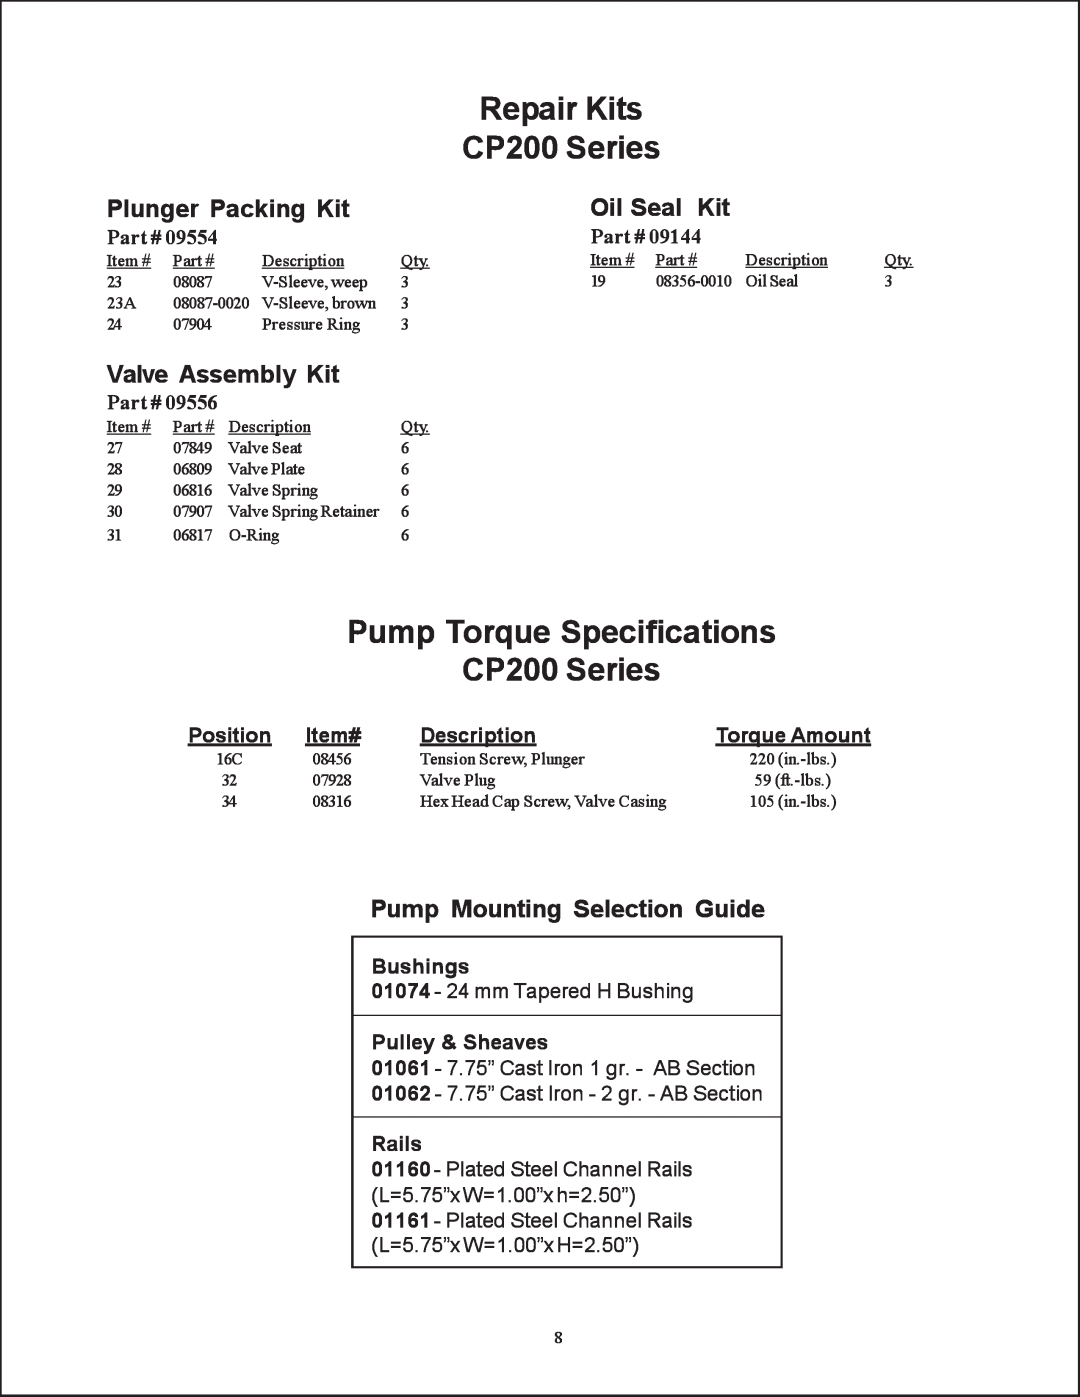 Giant Repair Kits CP200 Series, Pump Torque Specifications CP200 Series, Plunger Packing Kit, Oil Seal Kit, 09144 